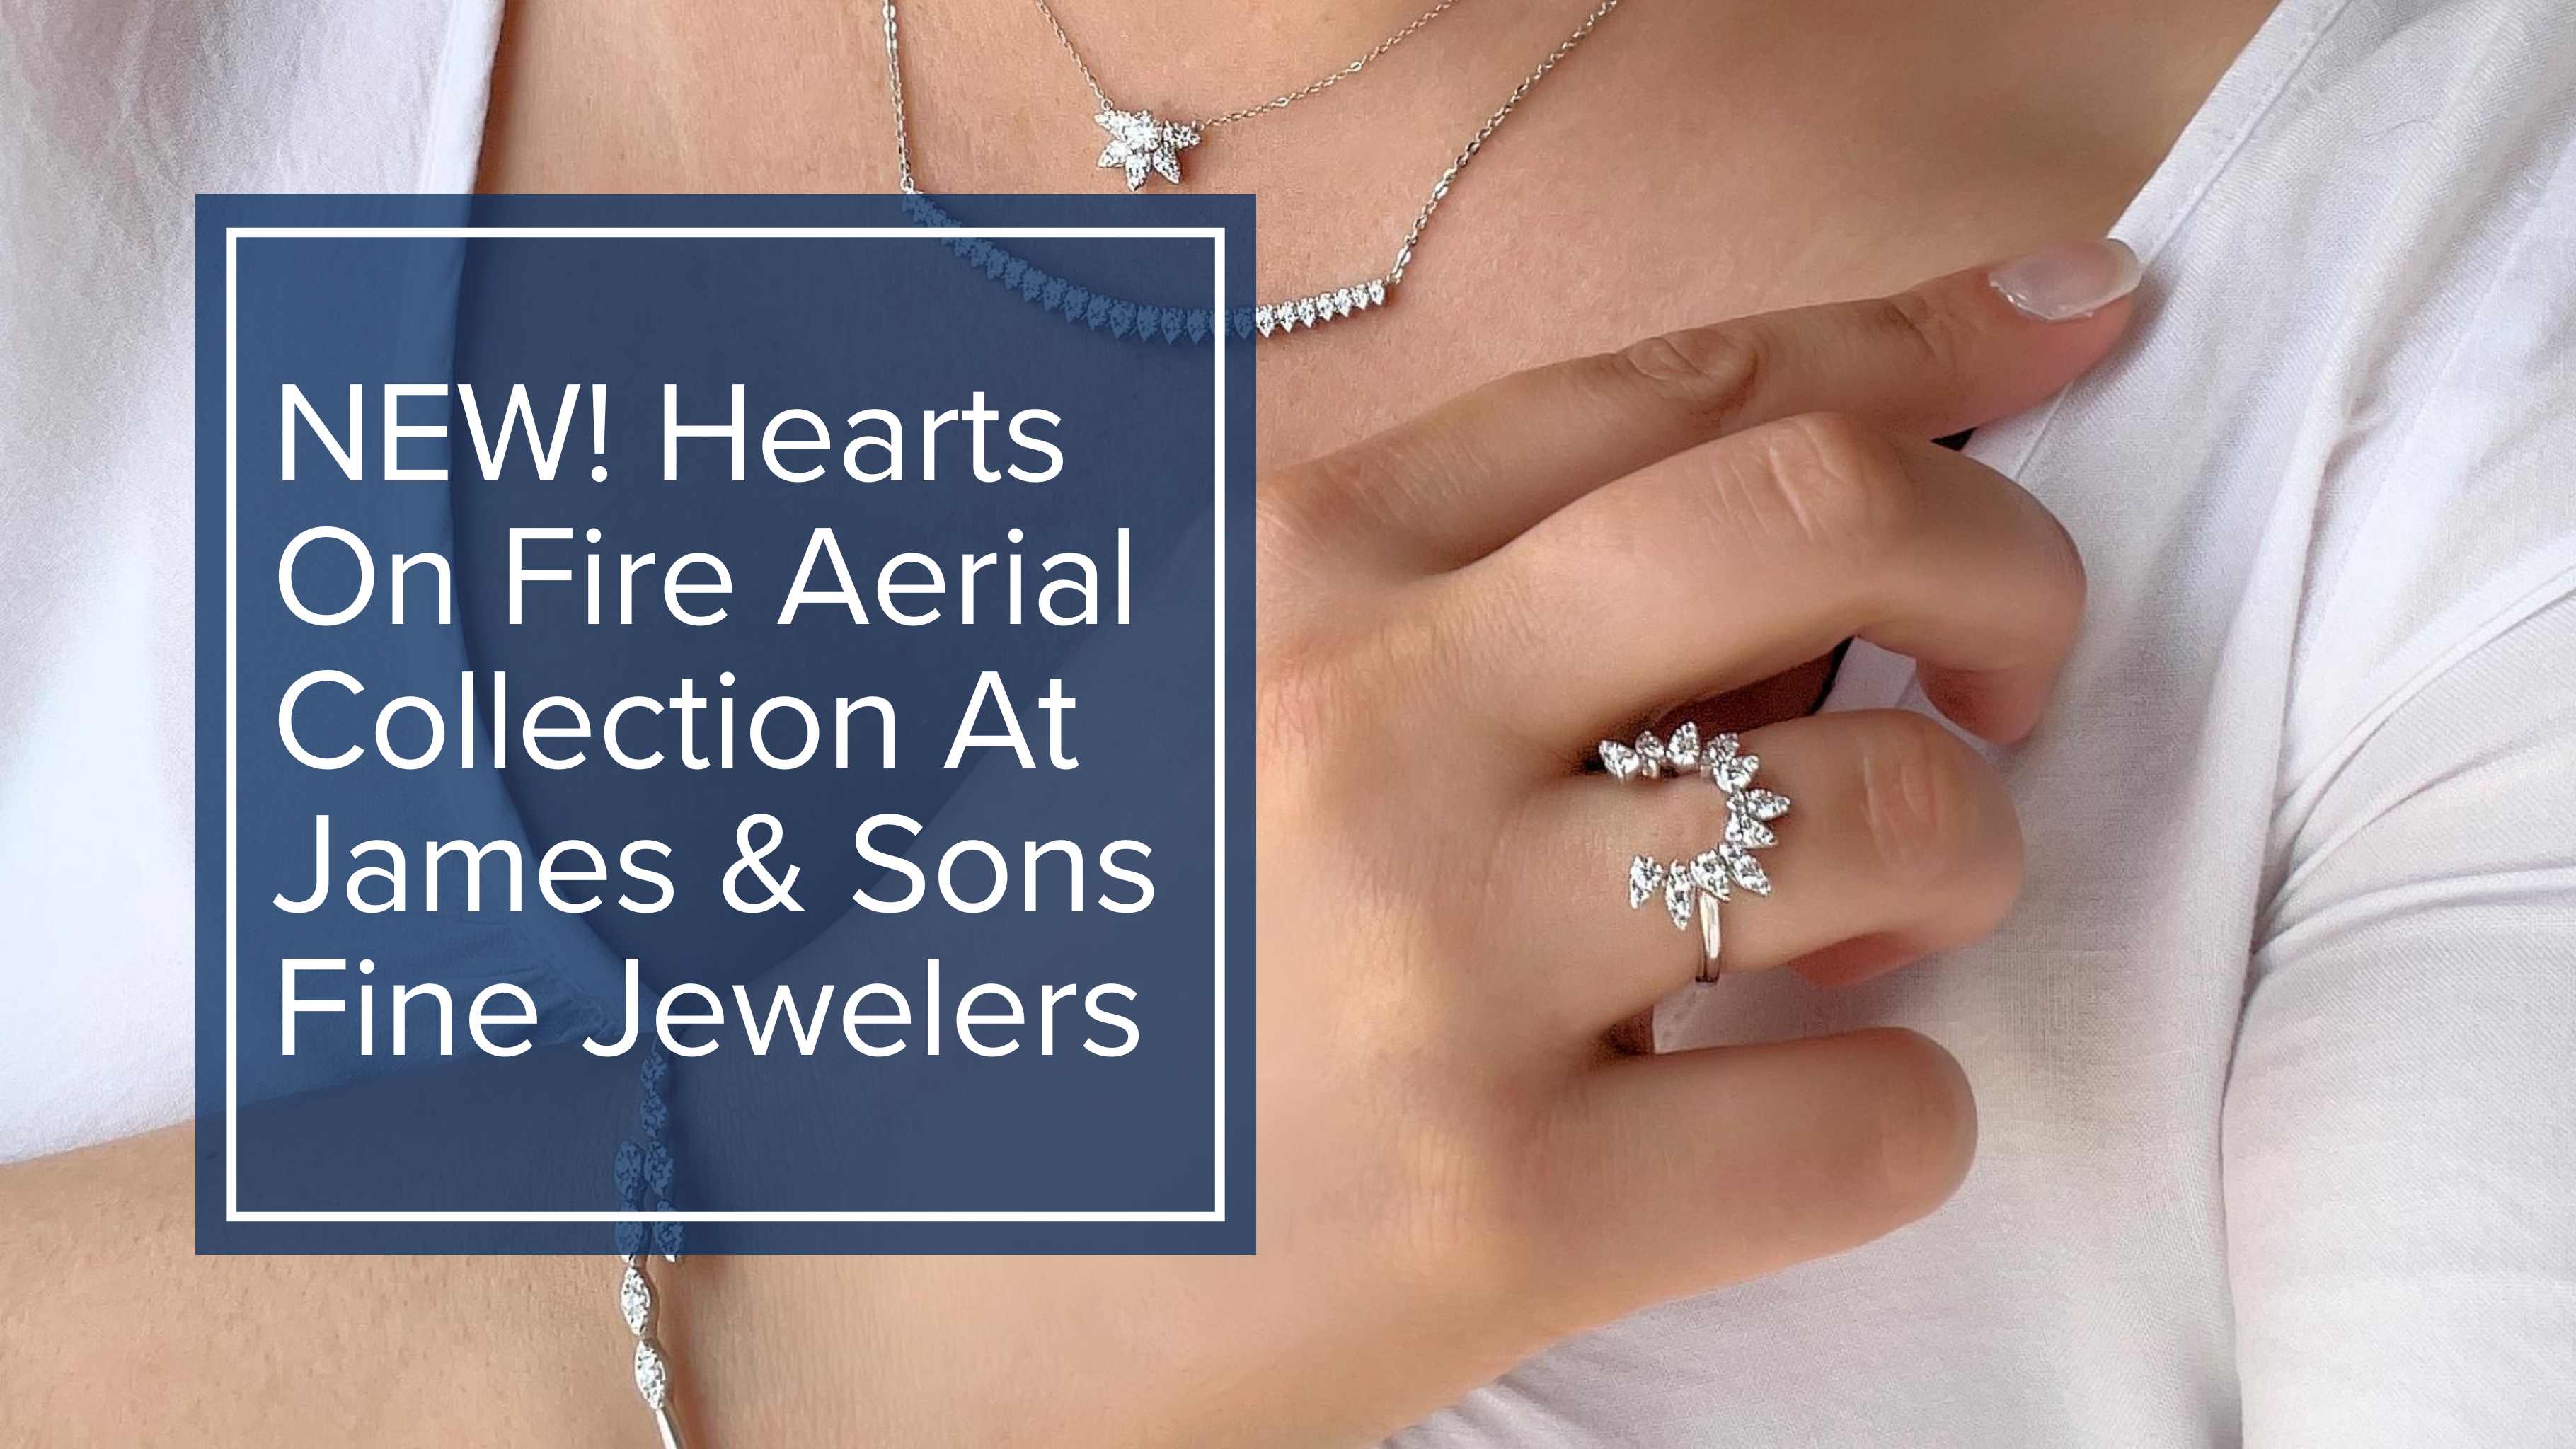 NEW! Hearts On Fire Aerial Collection at James & Sons Fine Jewelers